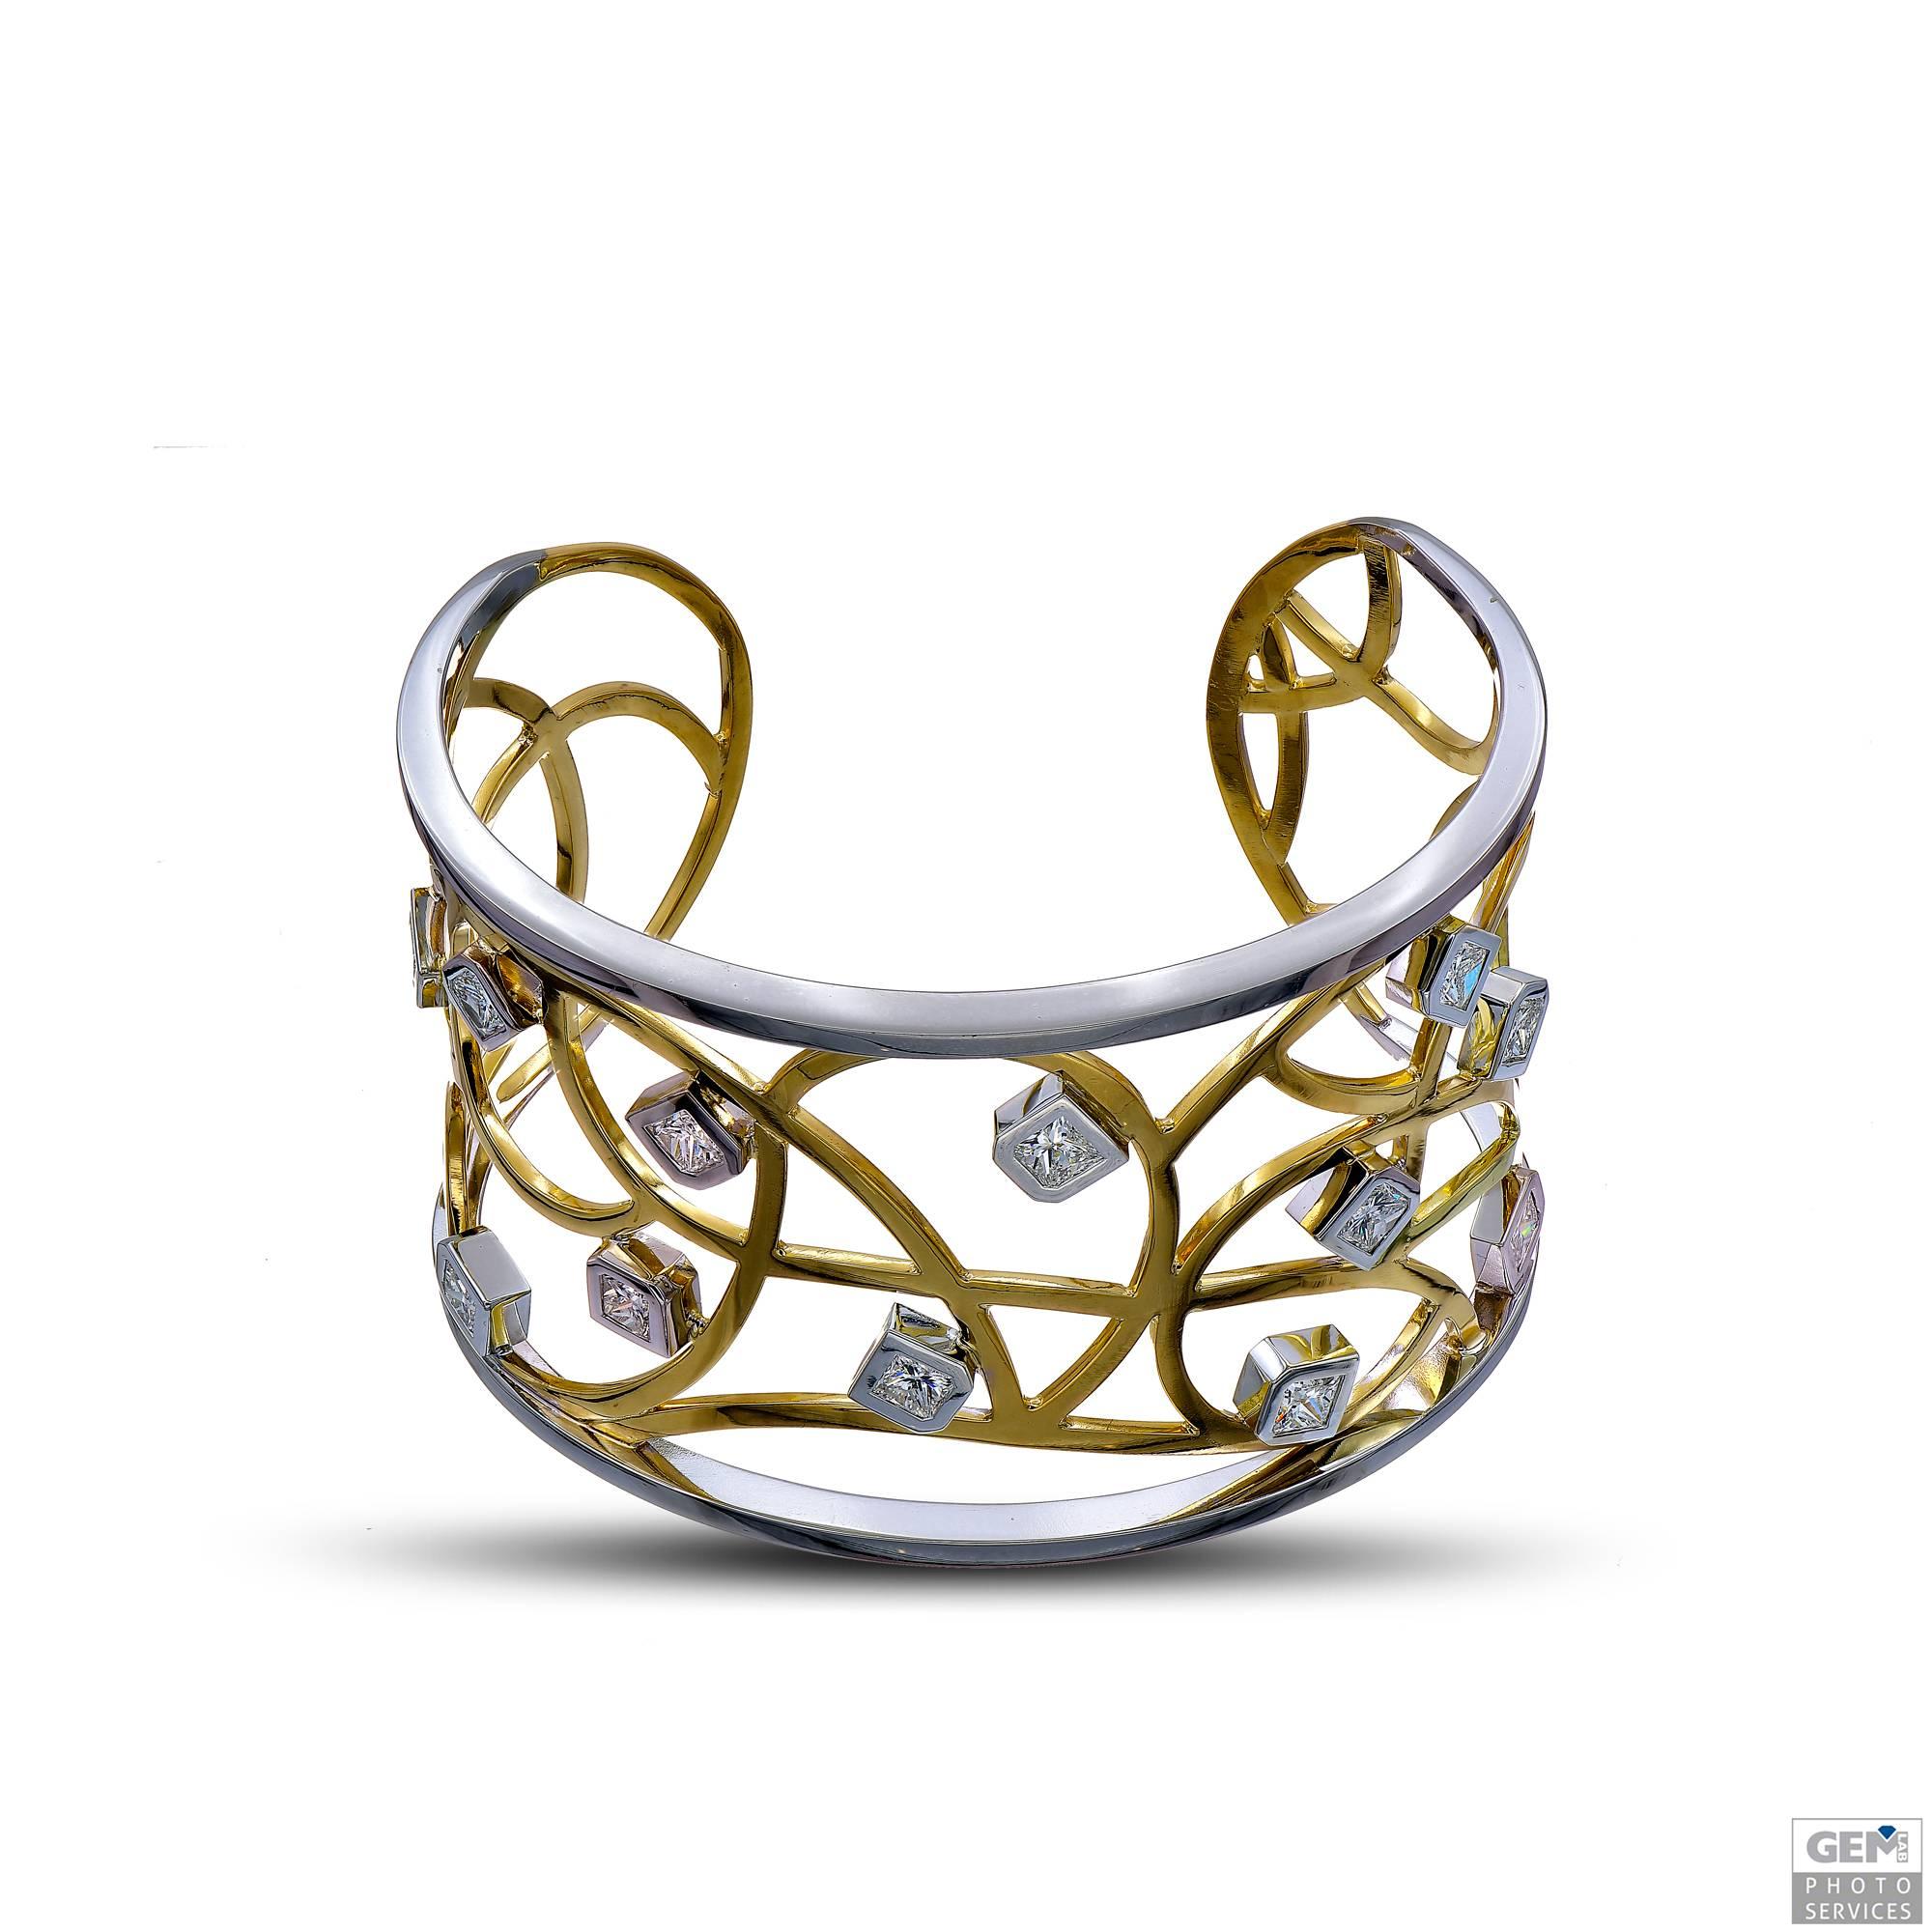 One of a kind cuff bracelet by Carigi. This bracelet is entirely made by hand in a combination of 18 karat yellow and white gold. The outer bands are made in white gold, as are the bezel settings around the diamonds. The inner design is crafted in